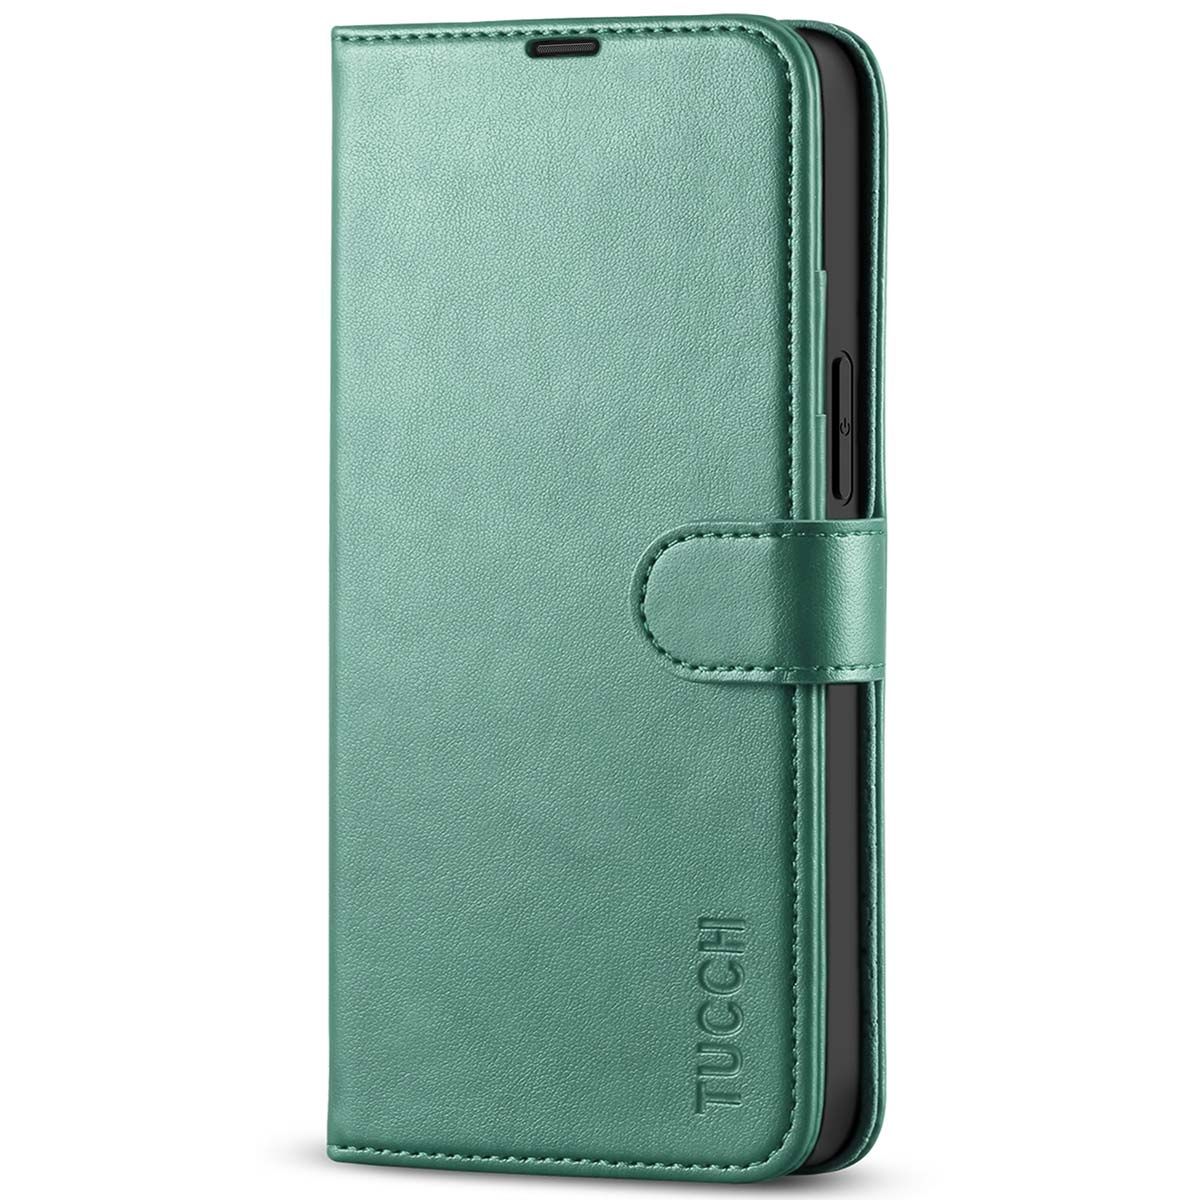 TUCCH iPhone 13 Mini Wallet Case - Mini iPhone 13 5.4-inch PU Leather Cover  with Kickstand Folio Flip Book Style, Magnetic Closure-Myrtle Green